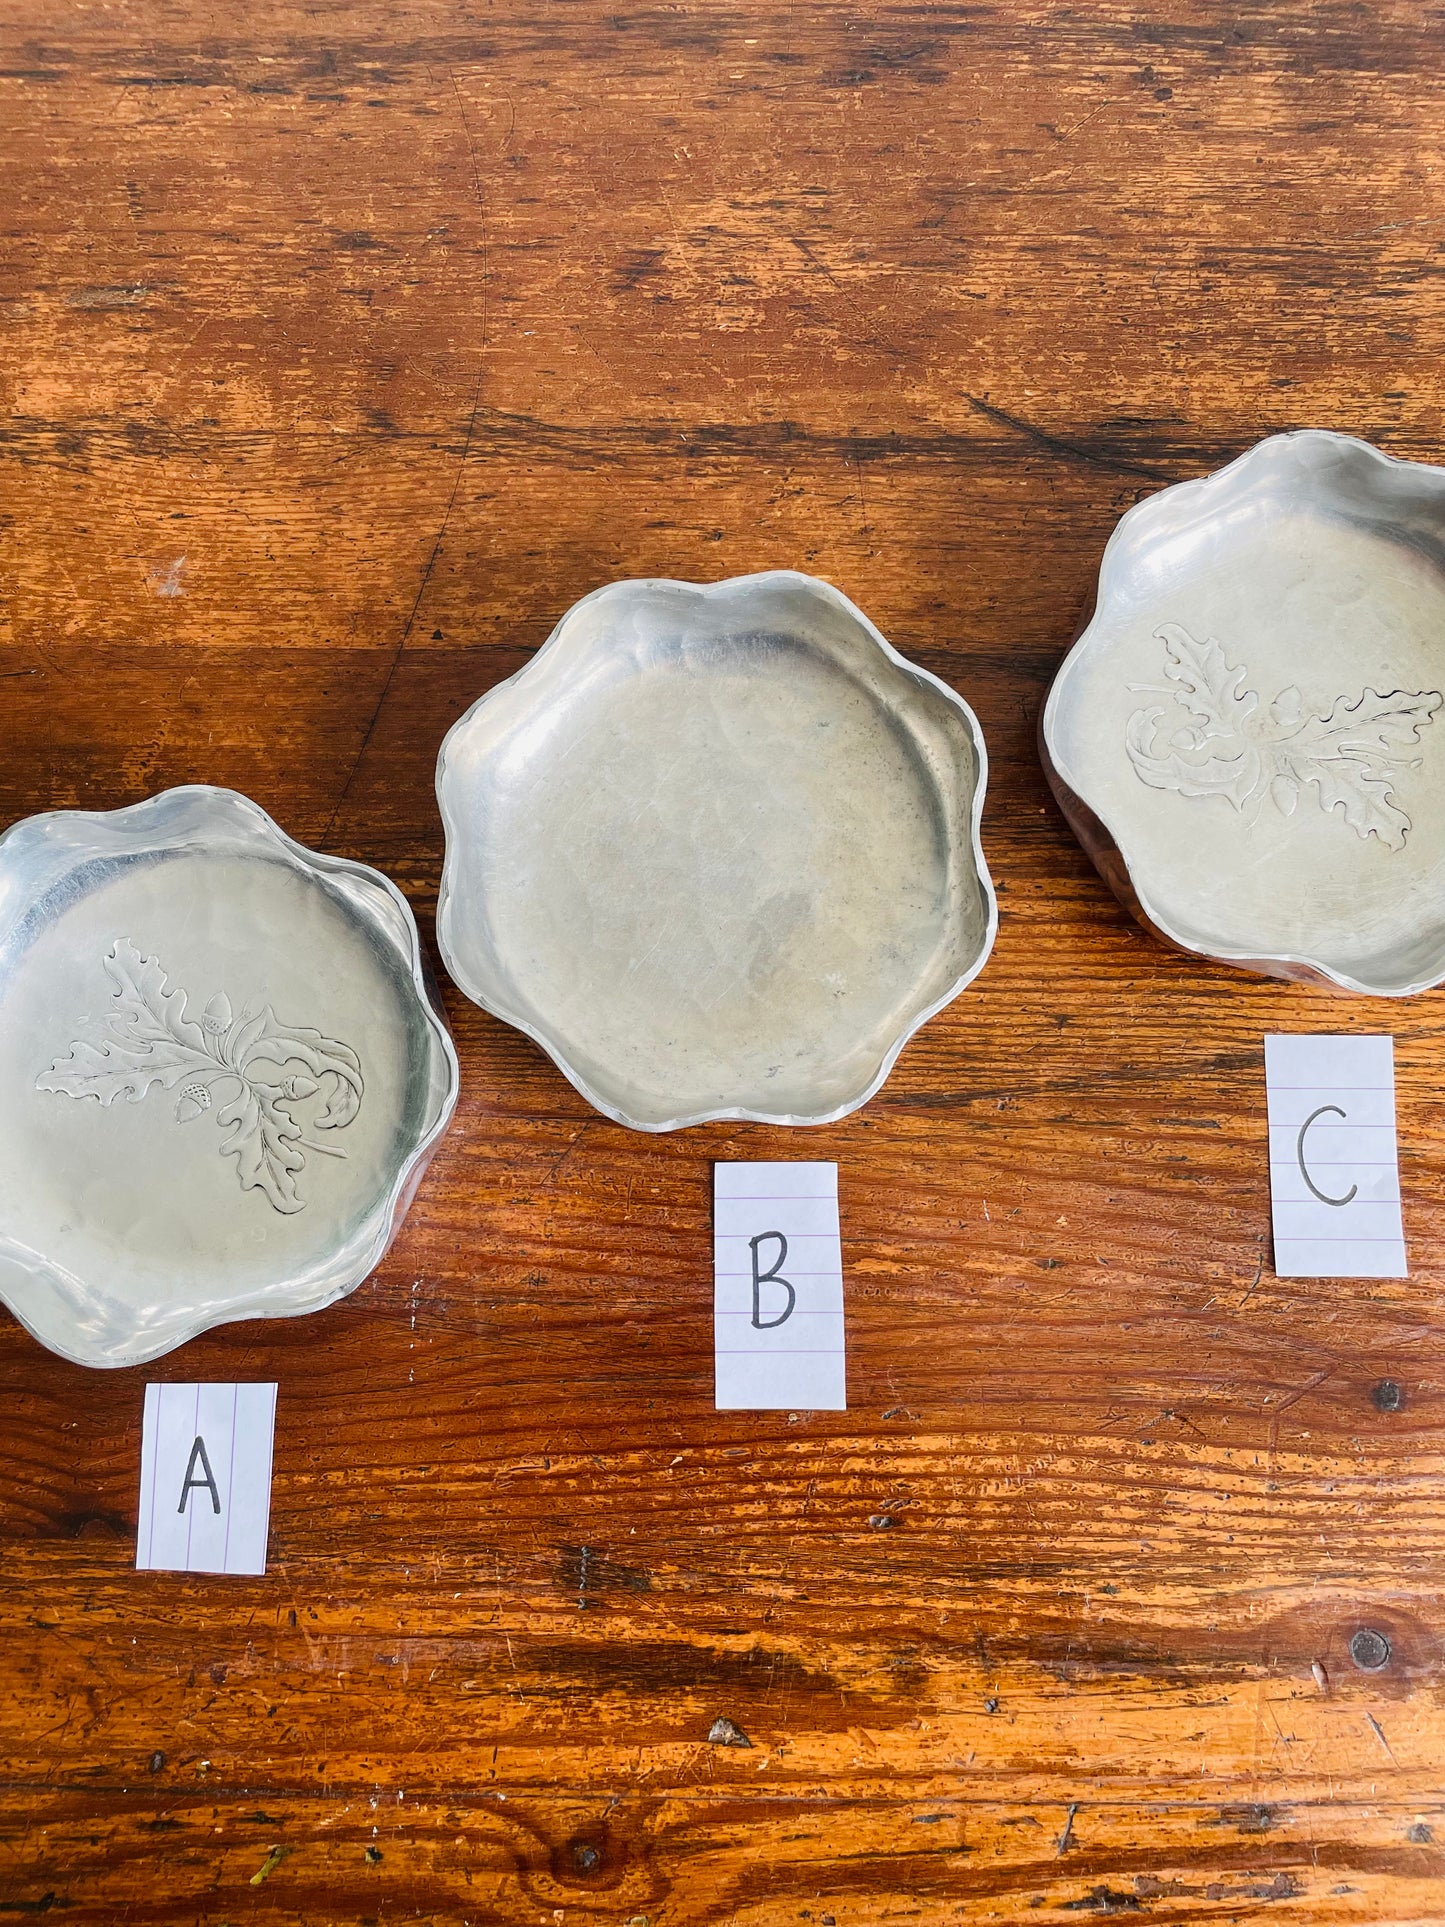 Alfred Day Hammered Aluminium Bowls - Plain or Acorn Design - Sold Individually (3 Available)